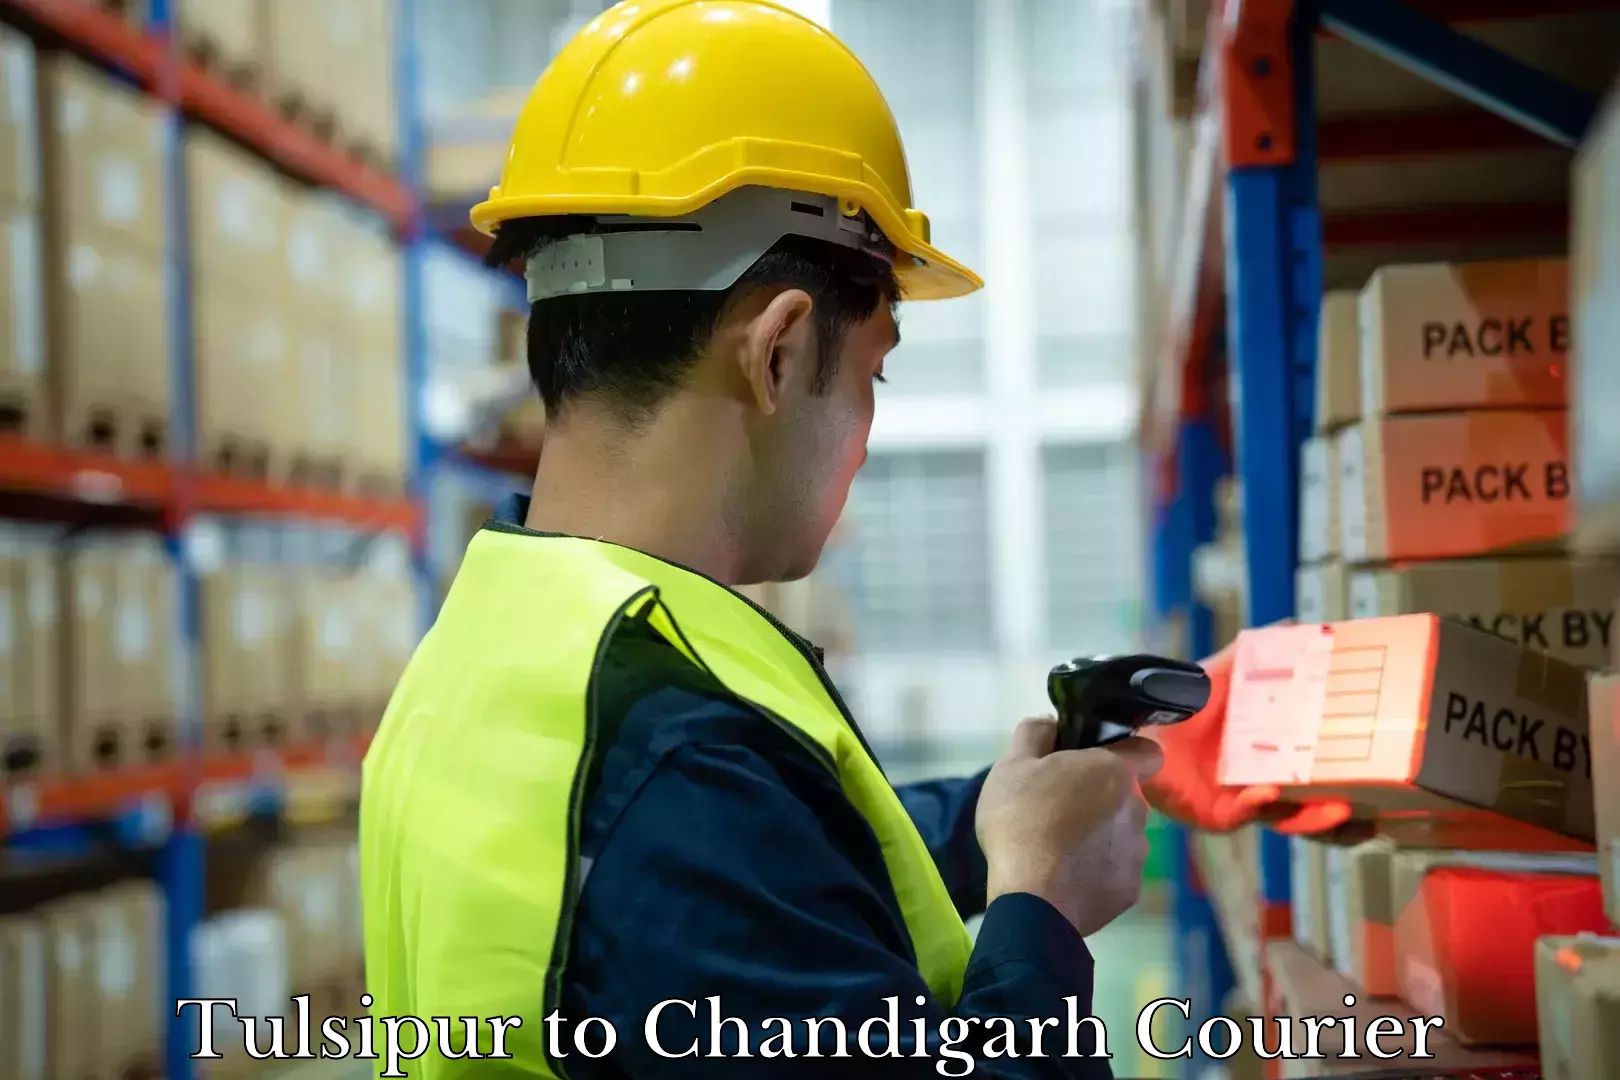 Baggage shipping service Tulsipur to Chandigarh